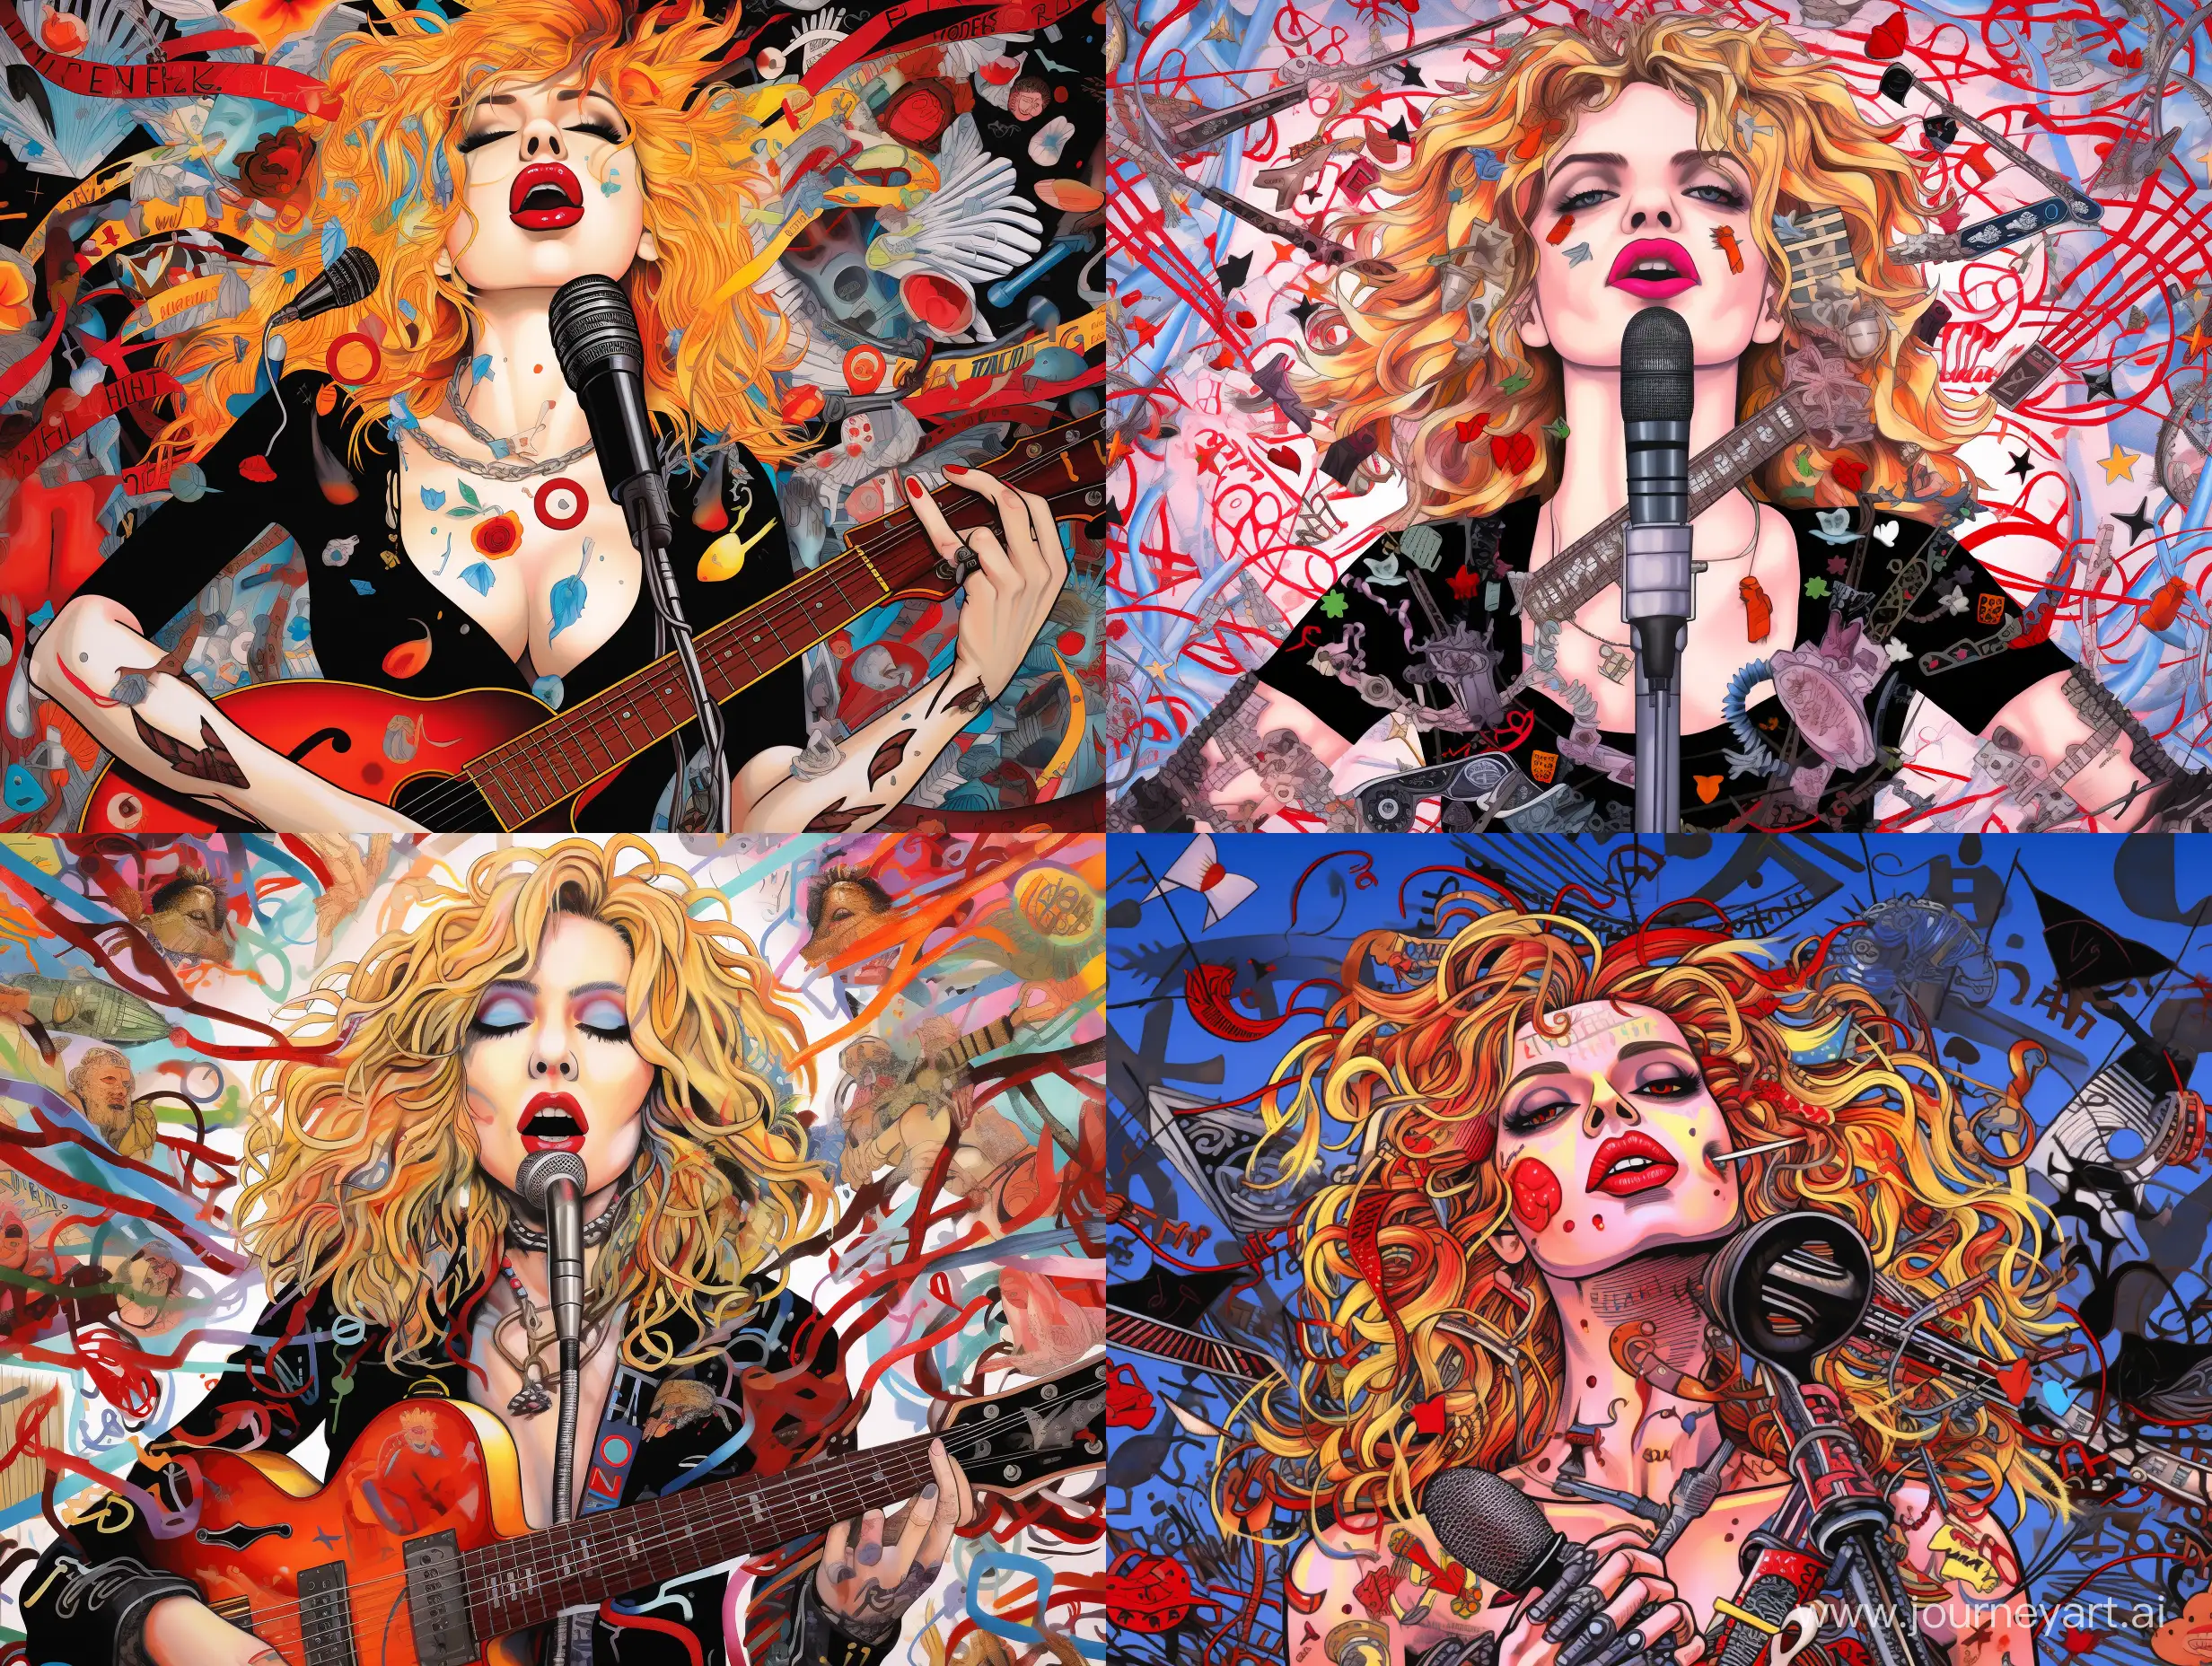 Waist portrait of Madonna Louise Ciccone singing, surrounded by musical symbols, lots of details, complex light colors, caricature, pop art style